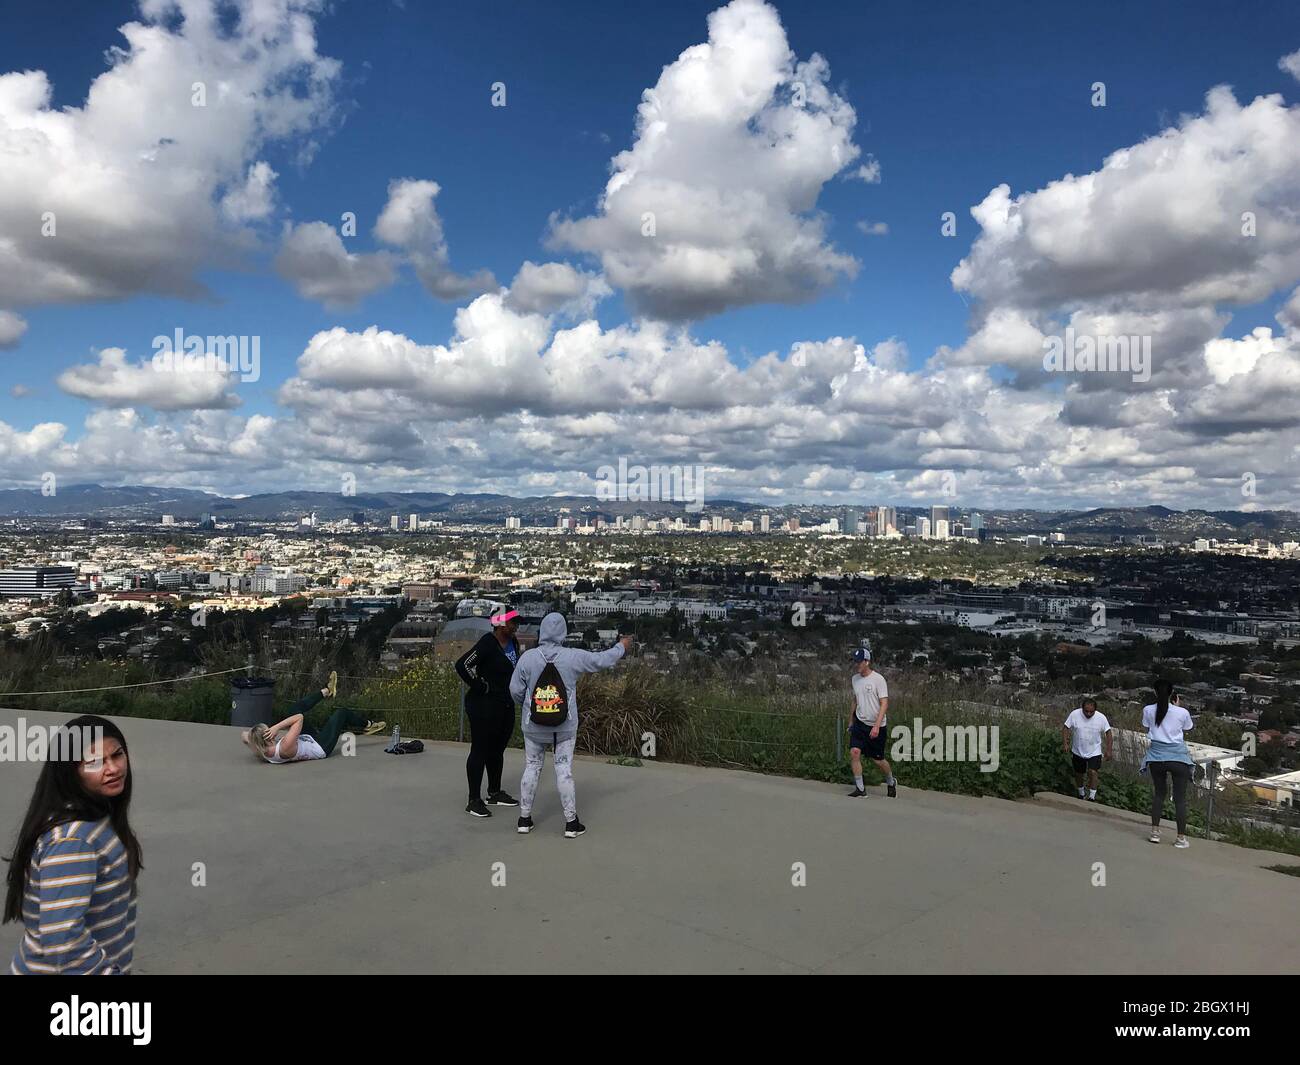 People enjoying the view across the Los Angeles basin of Culver City, Century City and Westwood from atop the  Baldwin Hills Scenic Overlook park. Stock Photo